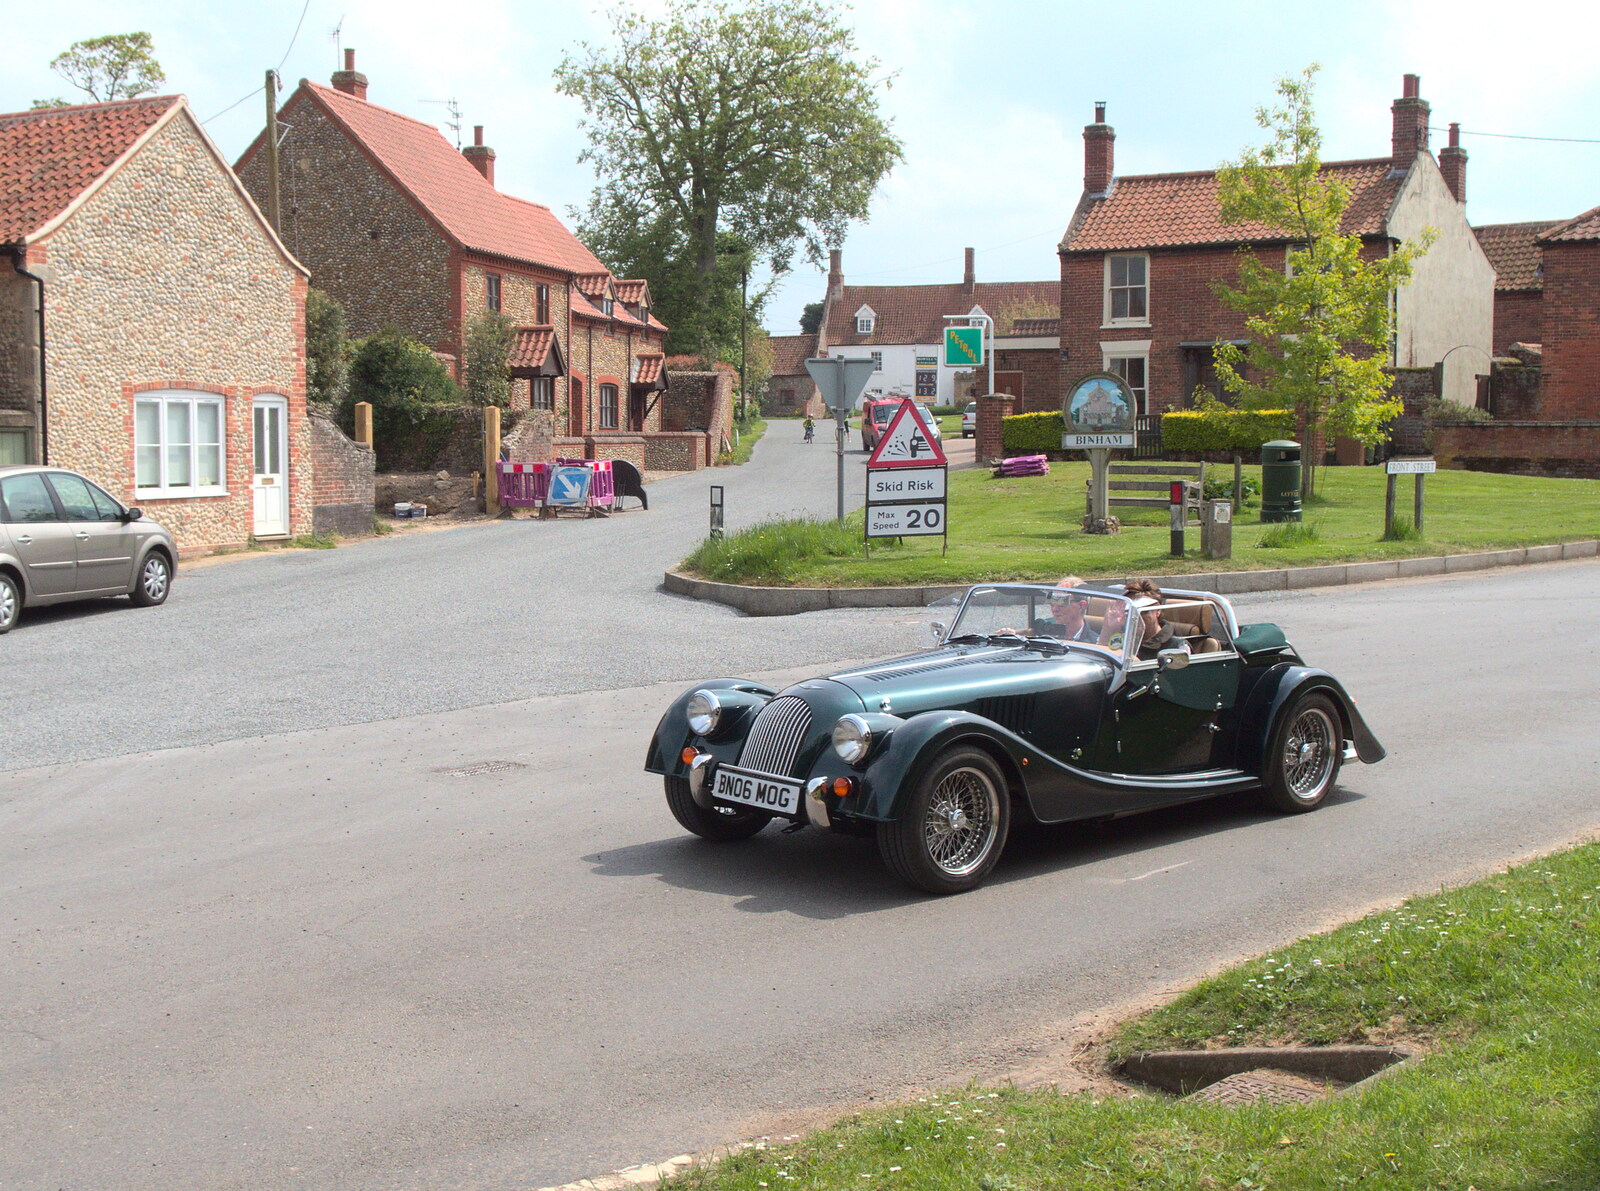 A Morgan roars past from The BSCC Weekend Away, Holt, Norfolk - 12th May 2018